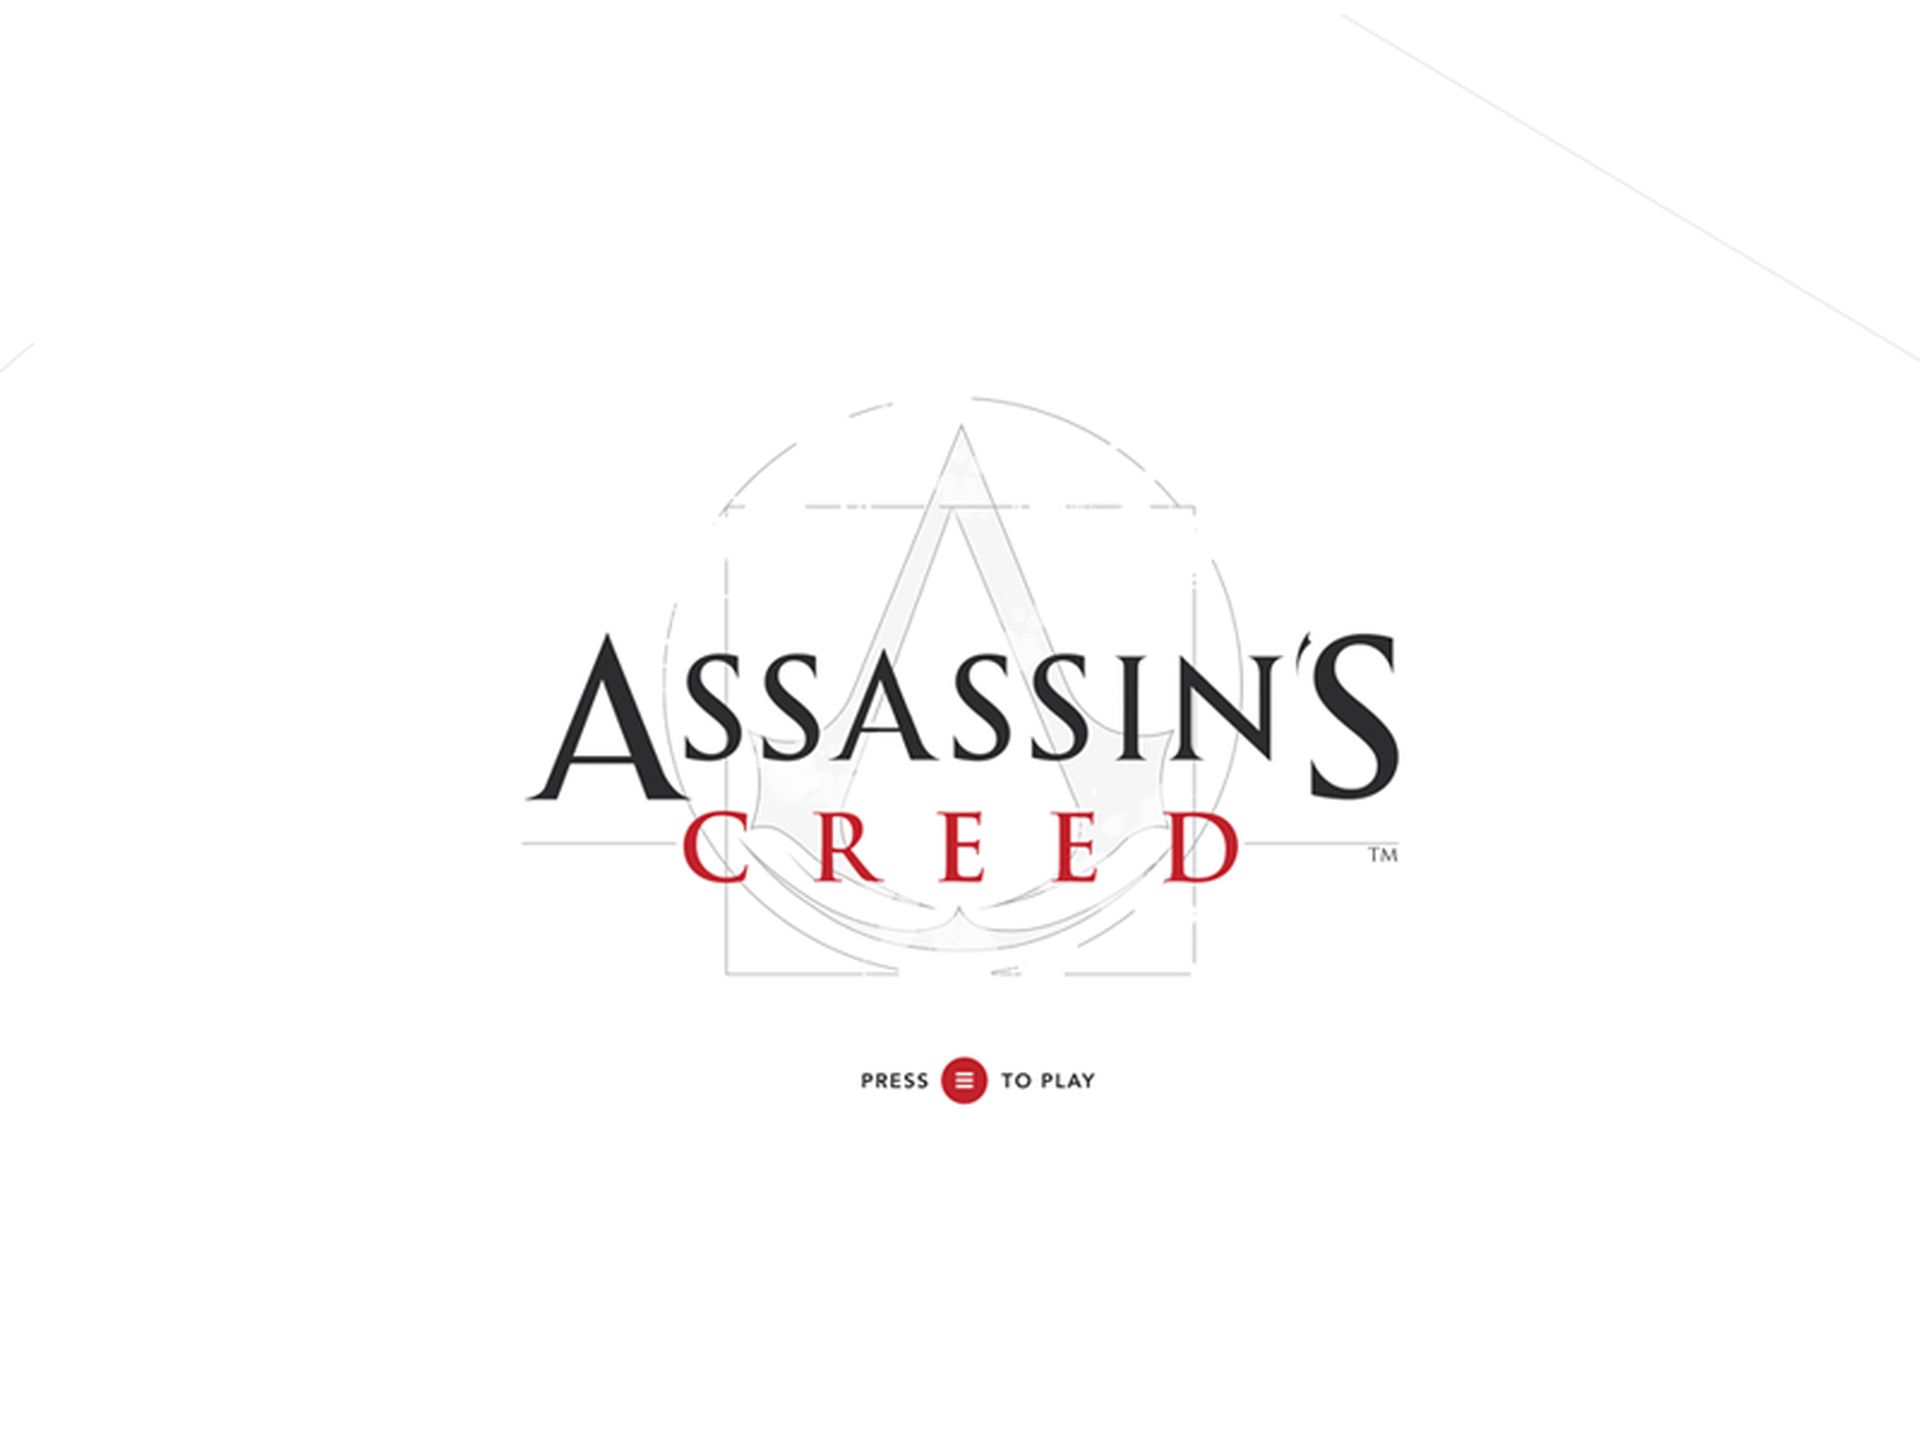 Assassin's Creed VR